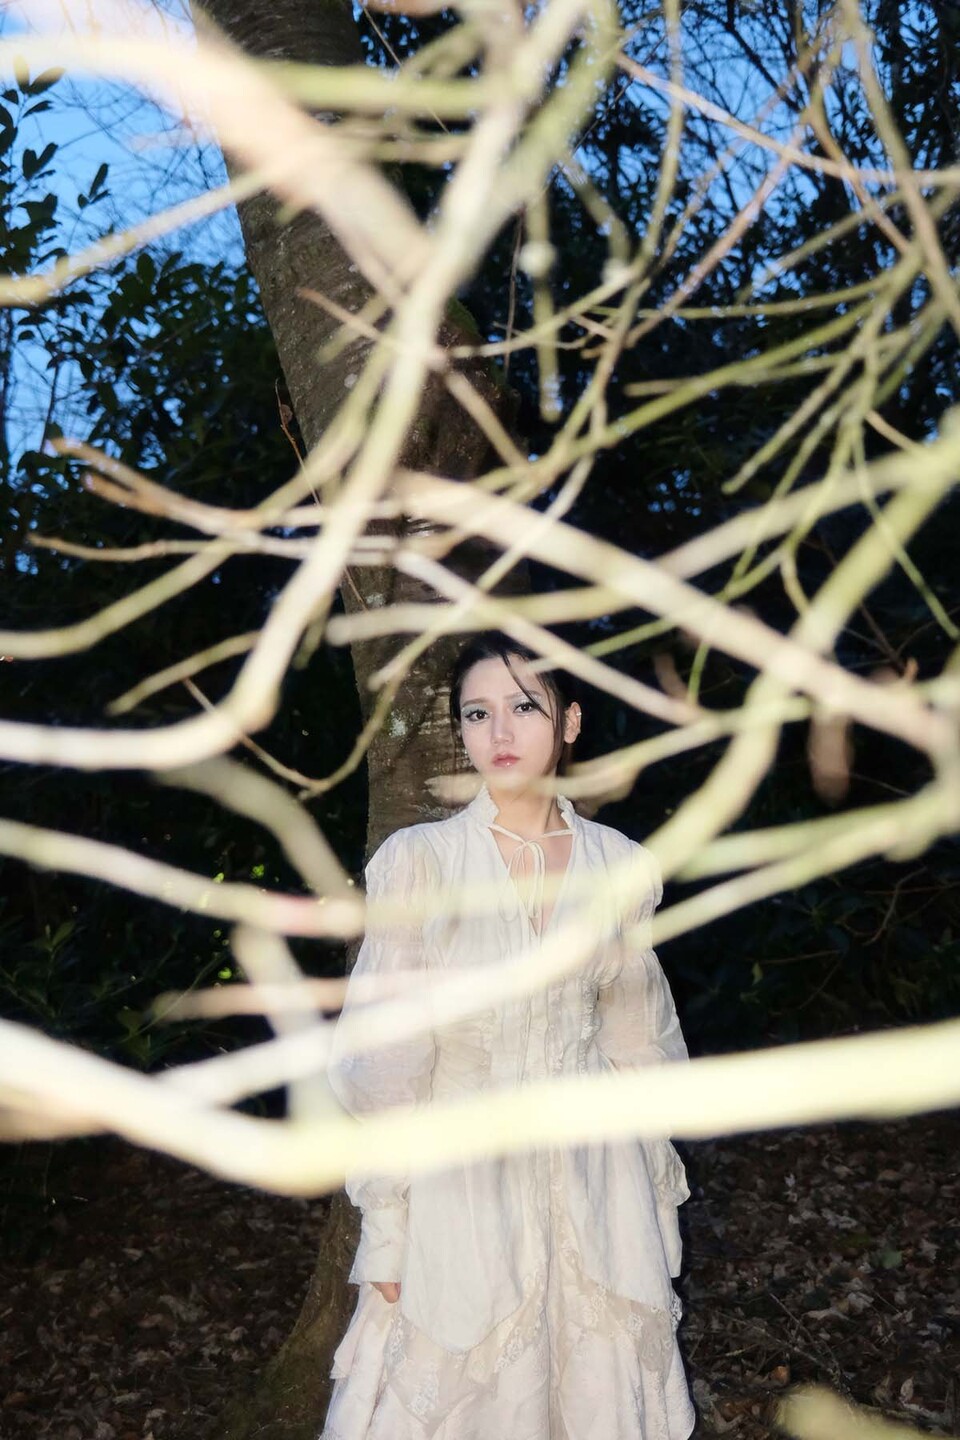 Young woman in long white dress under a tree is framed by branches that criss-cross her